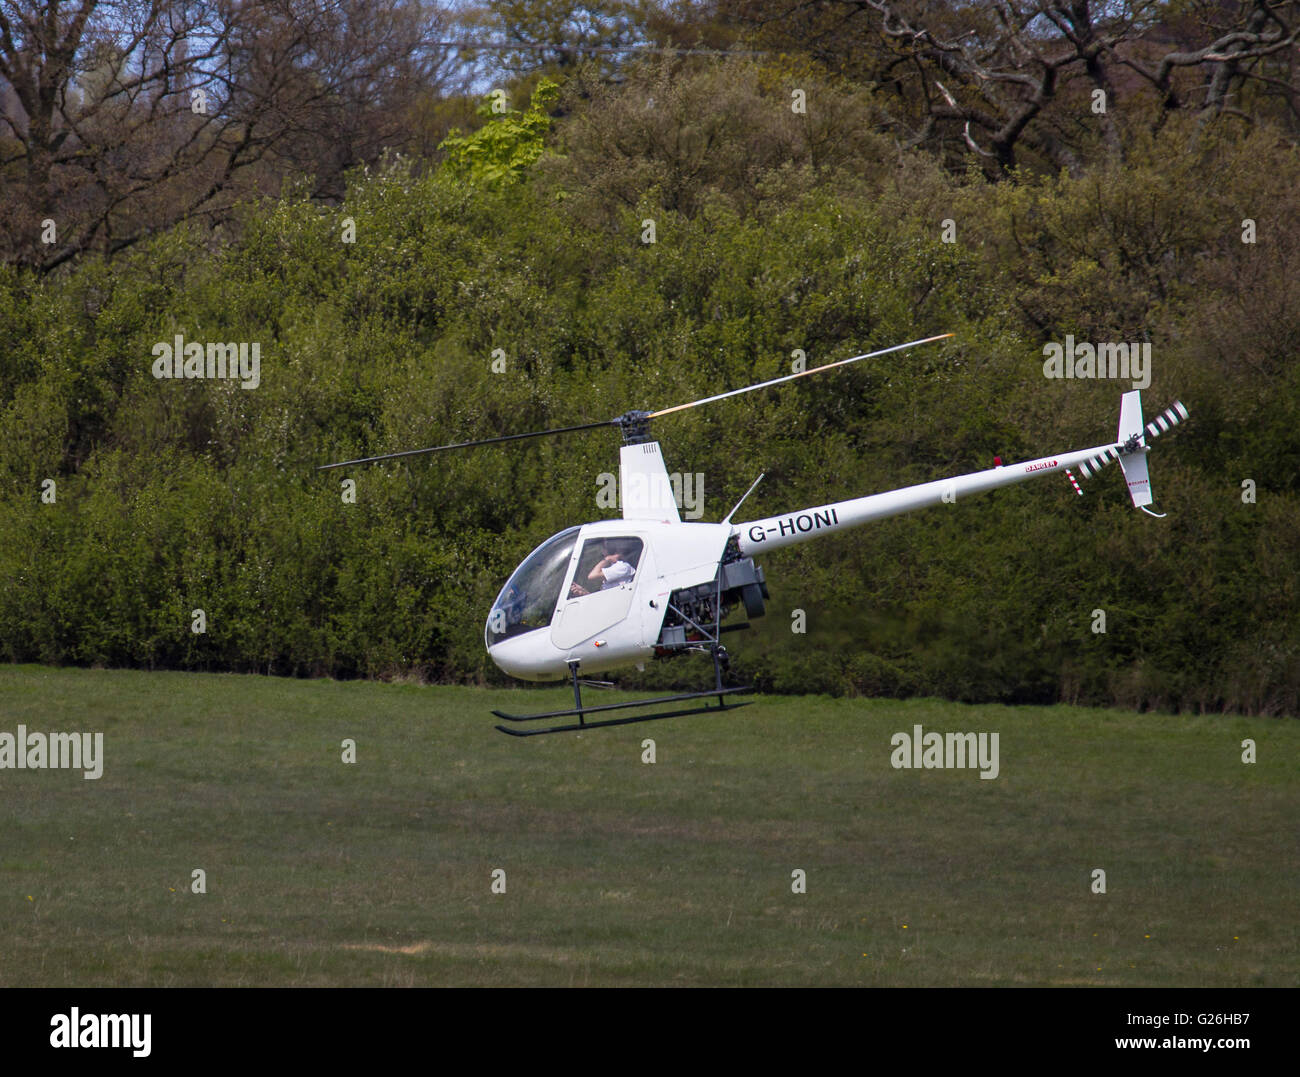 A two-seater Robinson R22 helicopter, G-HONI, flying low, very near the ground at Elstree Airfield in Hertfordshire, UK Stock Photo